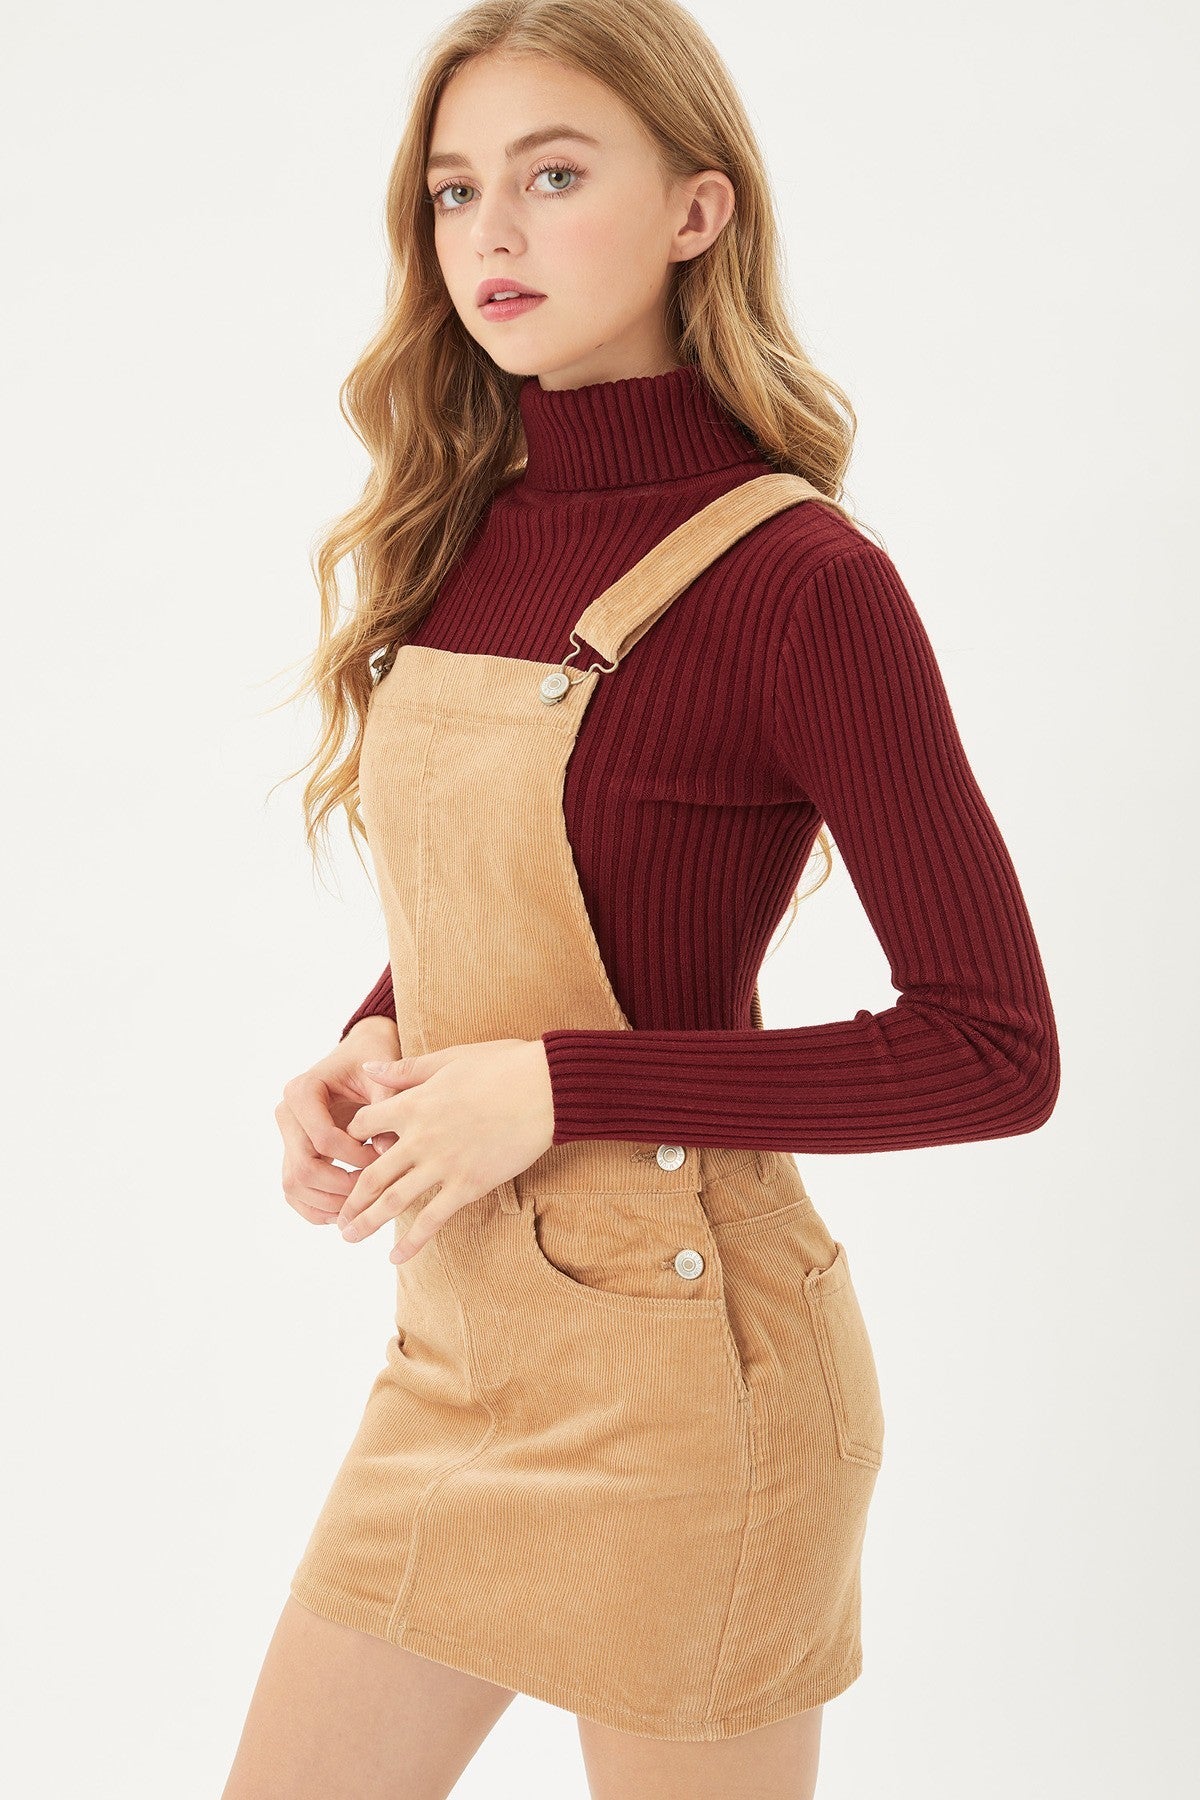 Overall Women's Dress with Adjustable Straps and Pockets